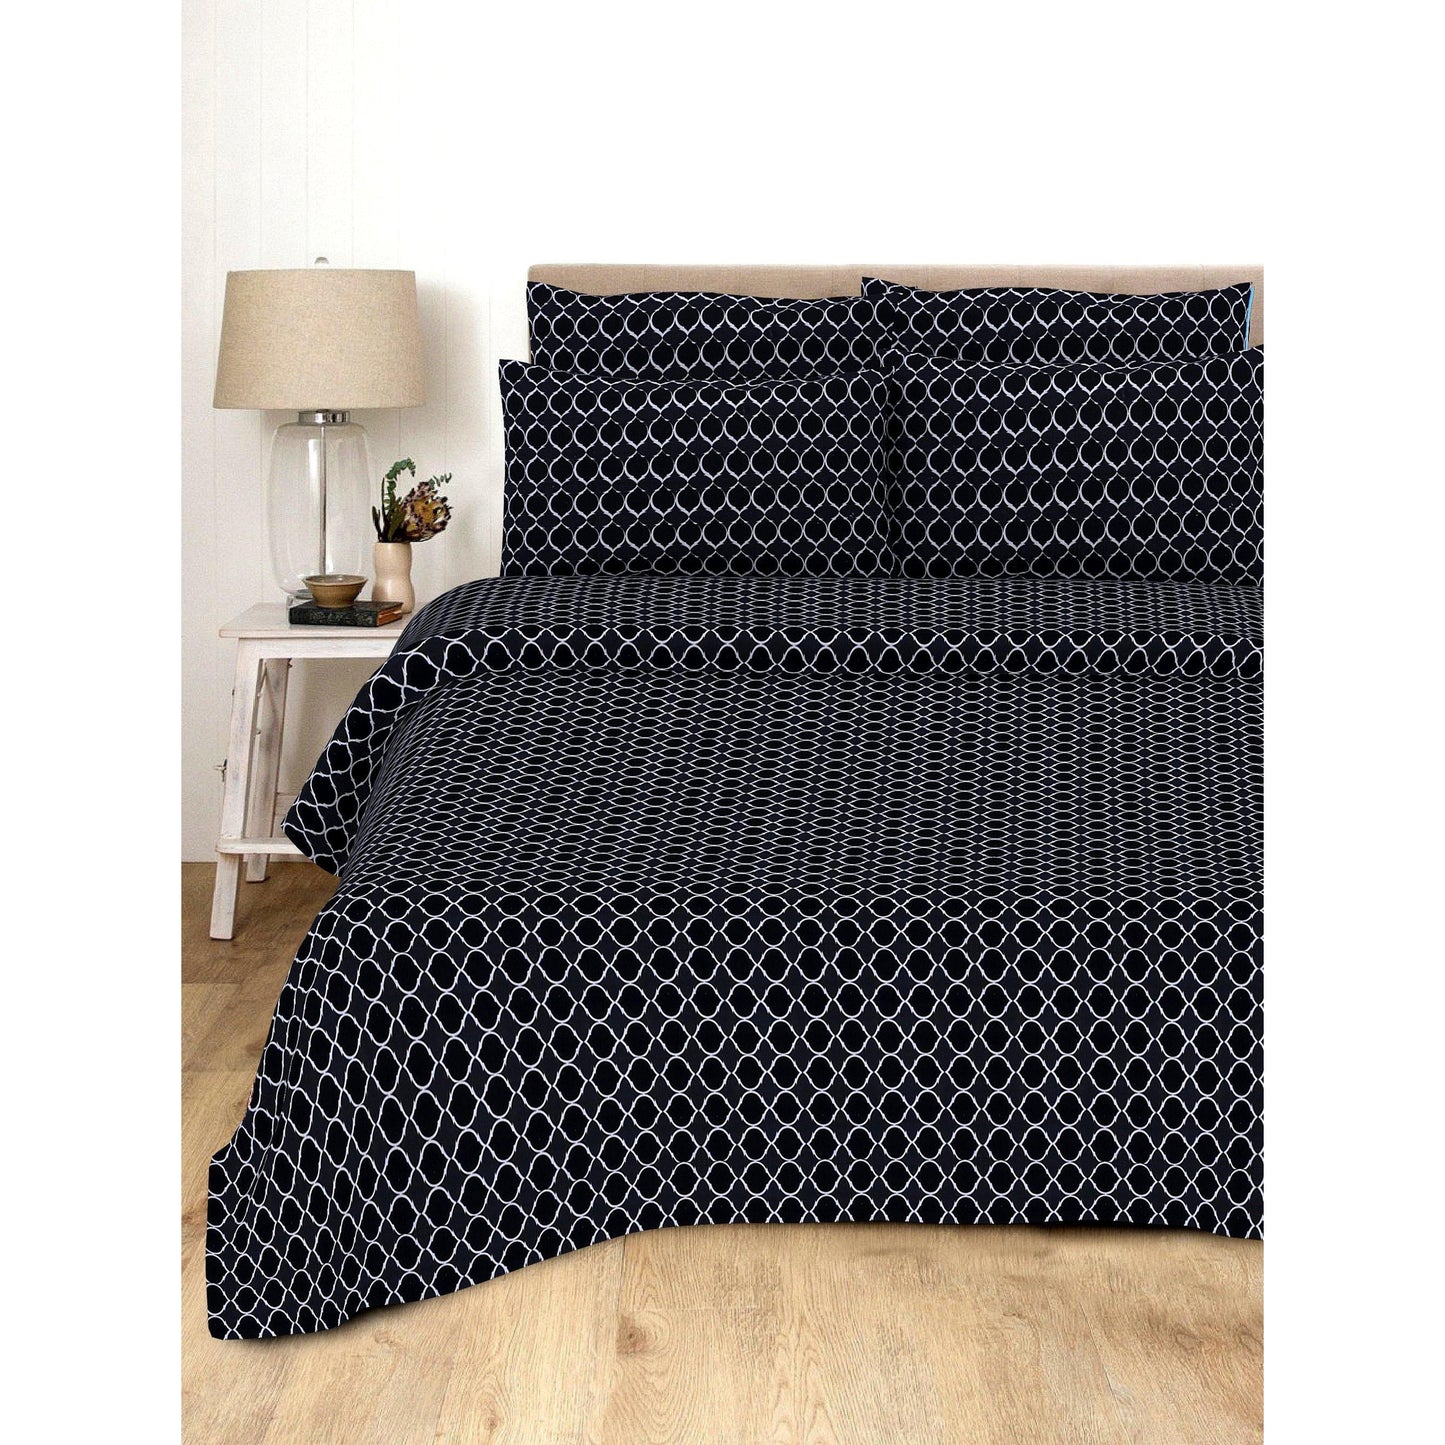 Double bedsheet 144 TC Black and White - The Teal Thread